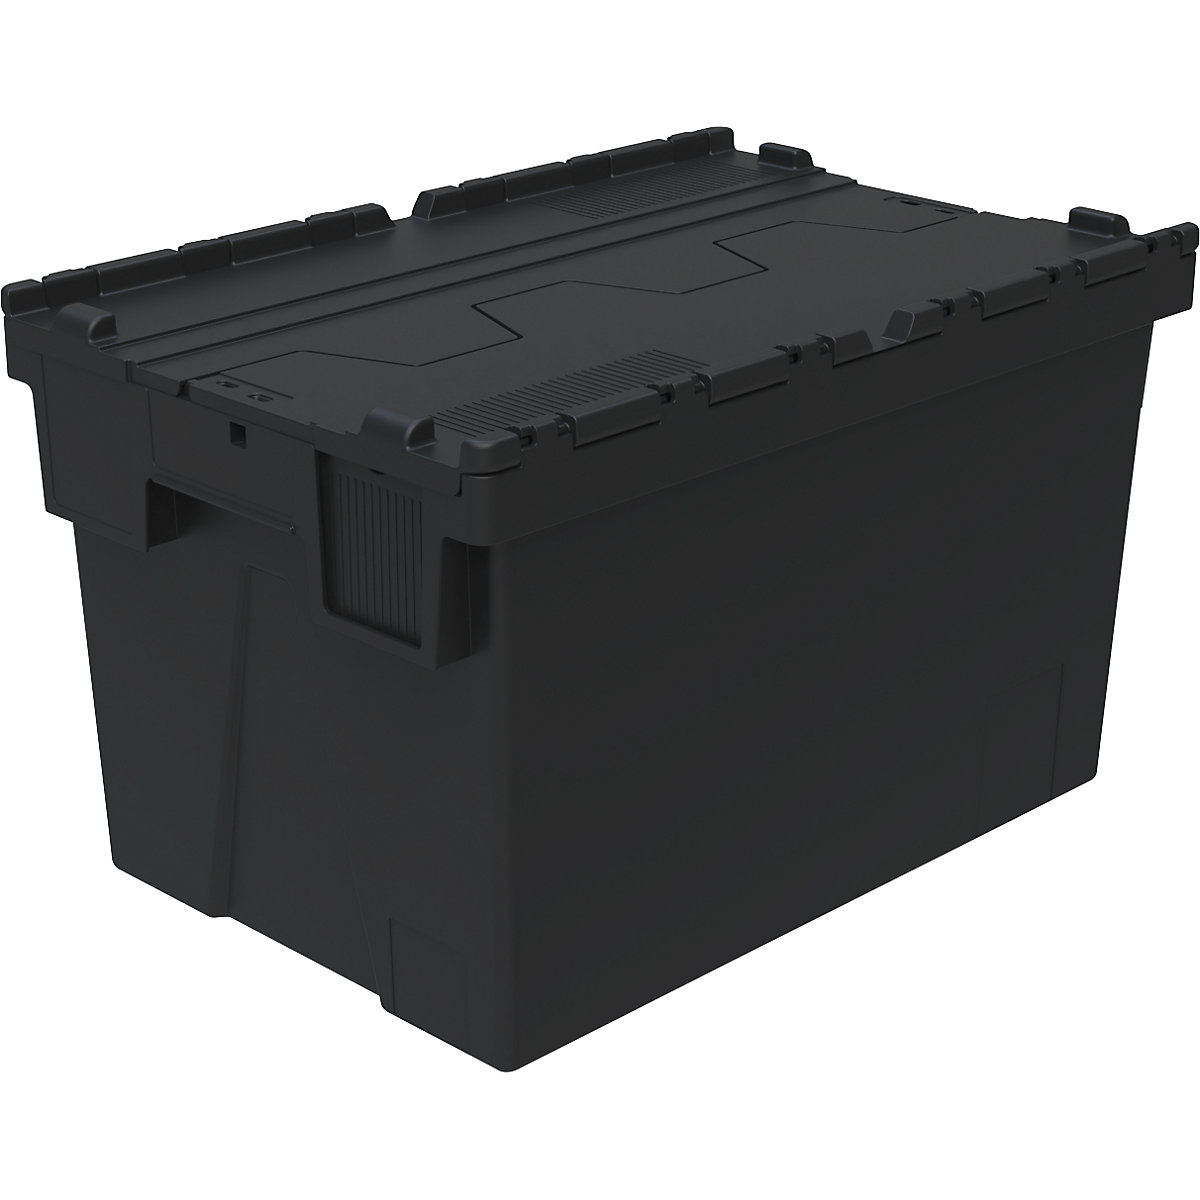 Reusable stacking container, LxWxH 600 x 400 x 367 mm, black-2